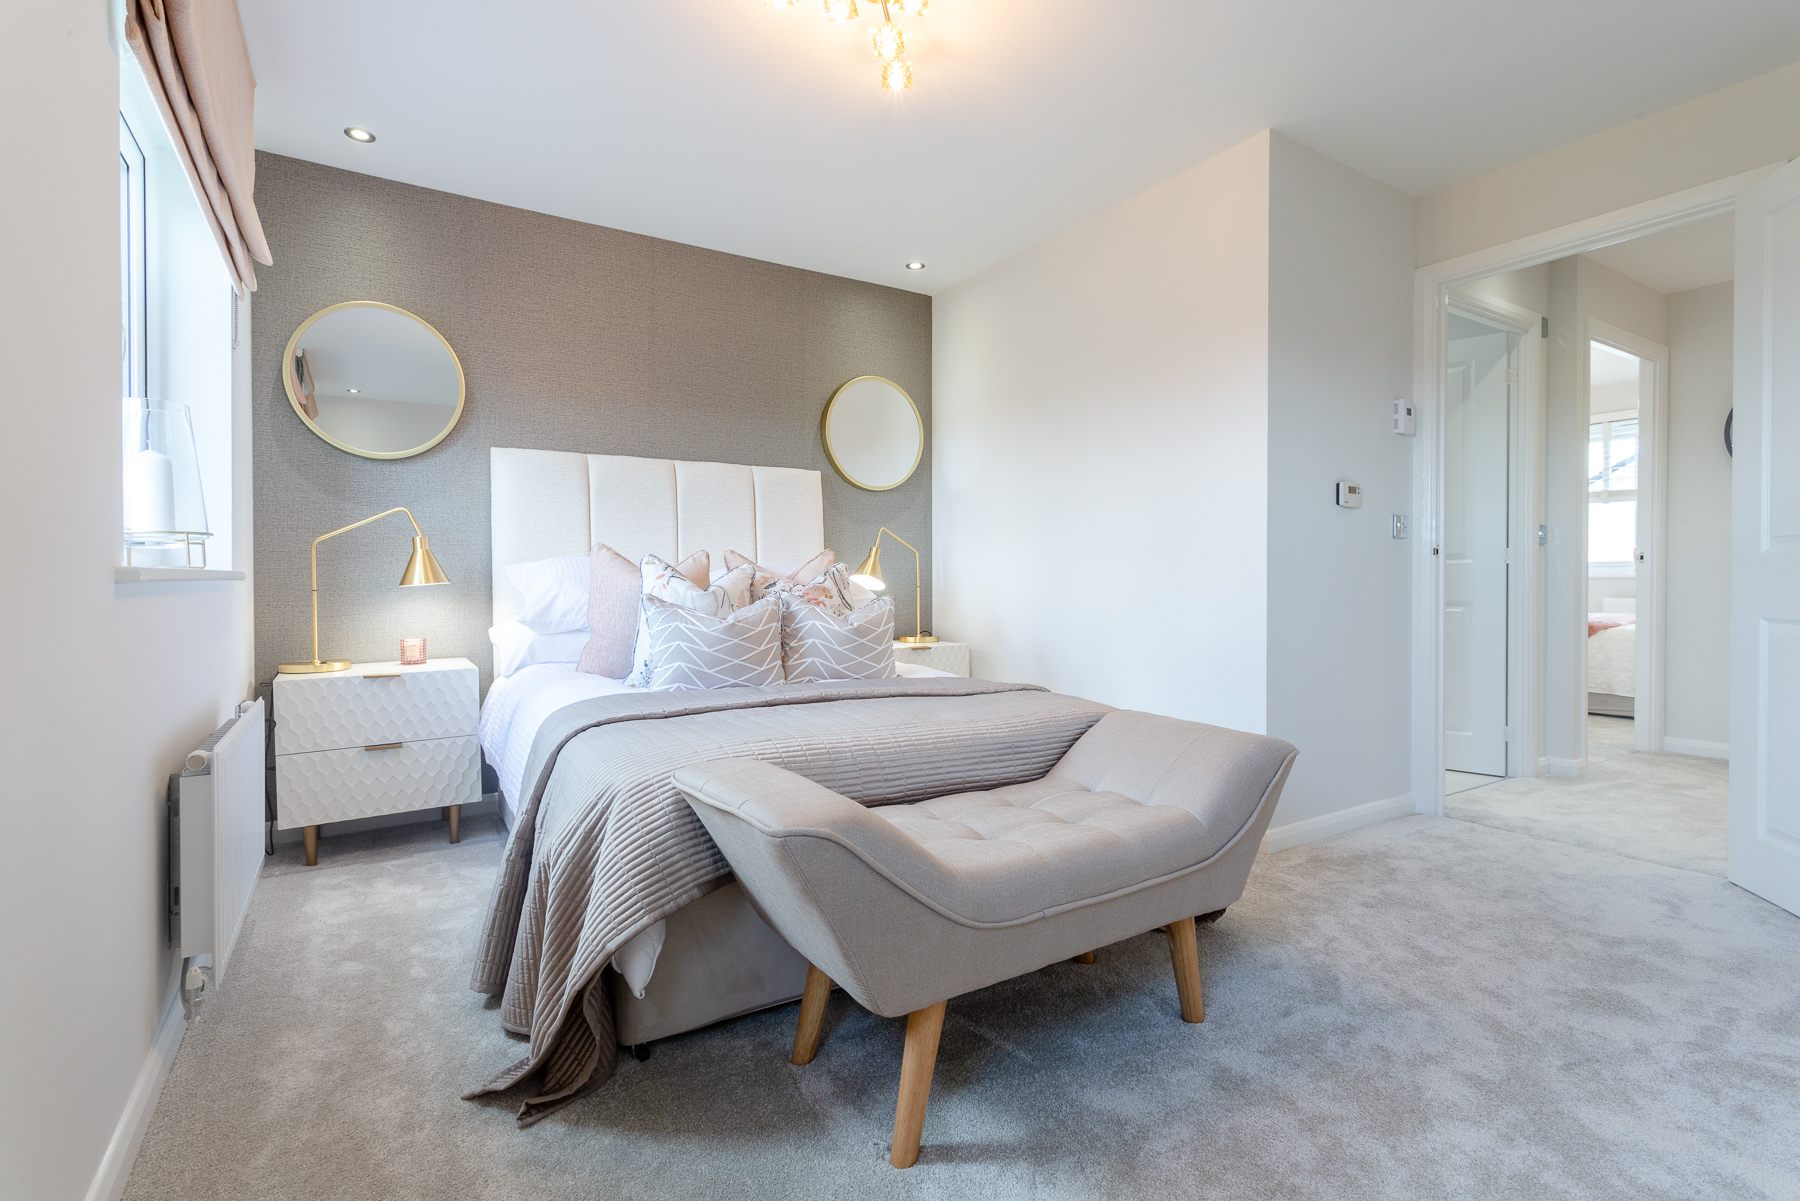 The Baxter 3 bedroom home Taylor Wimpey